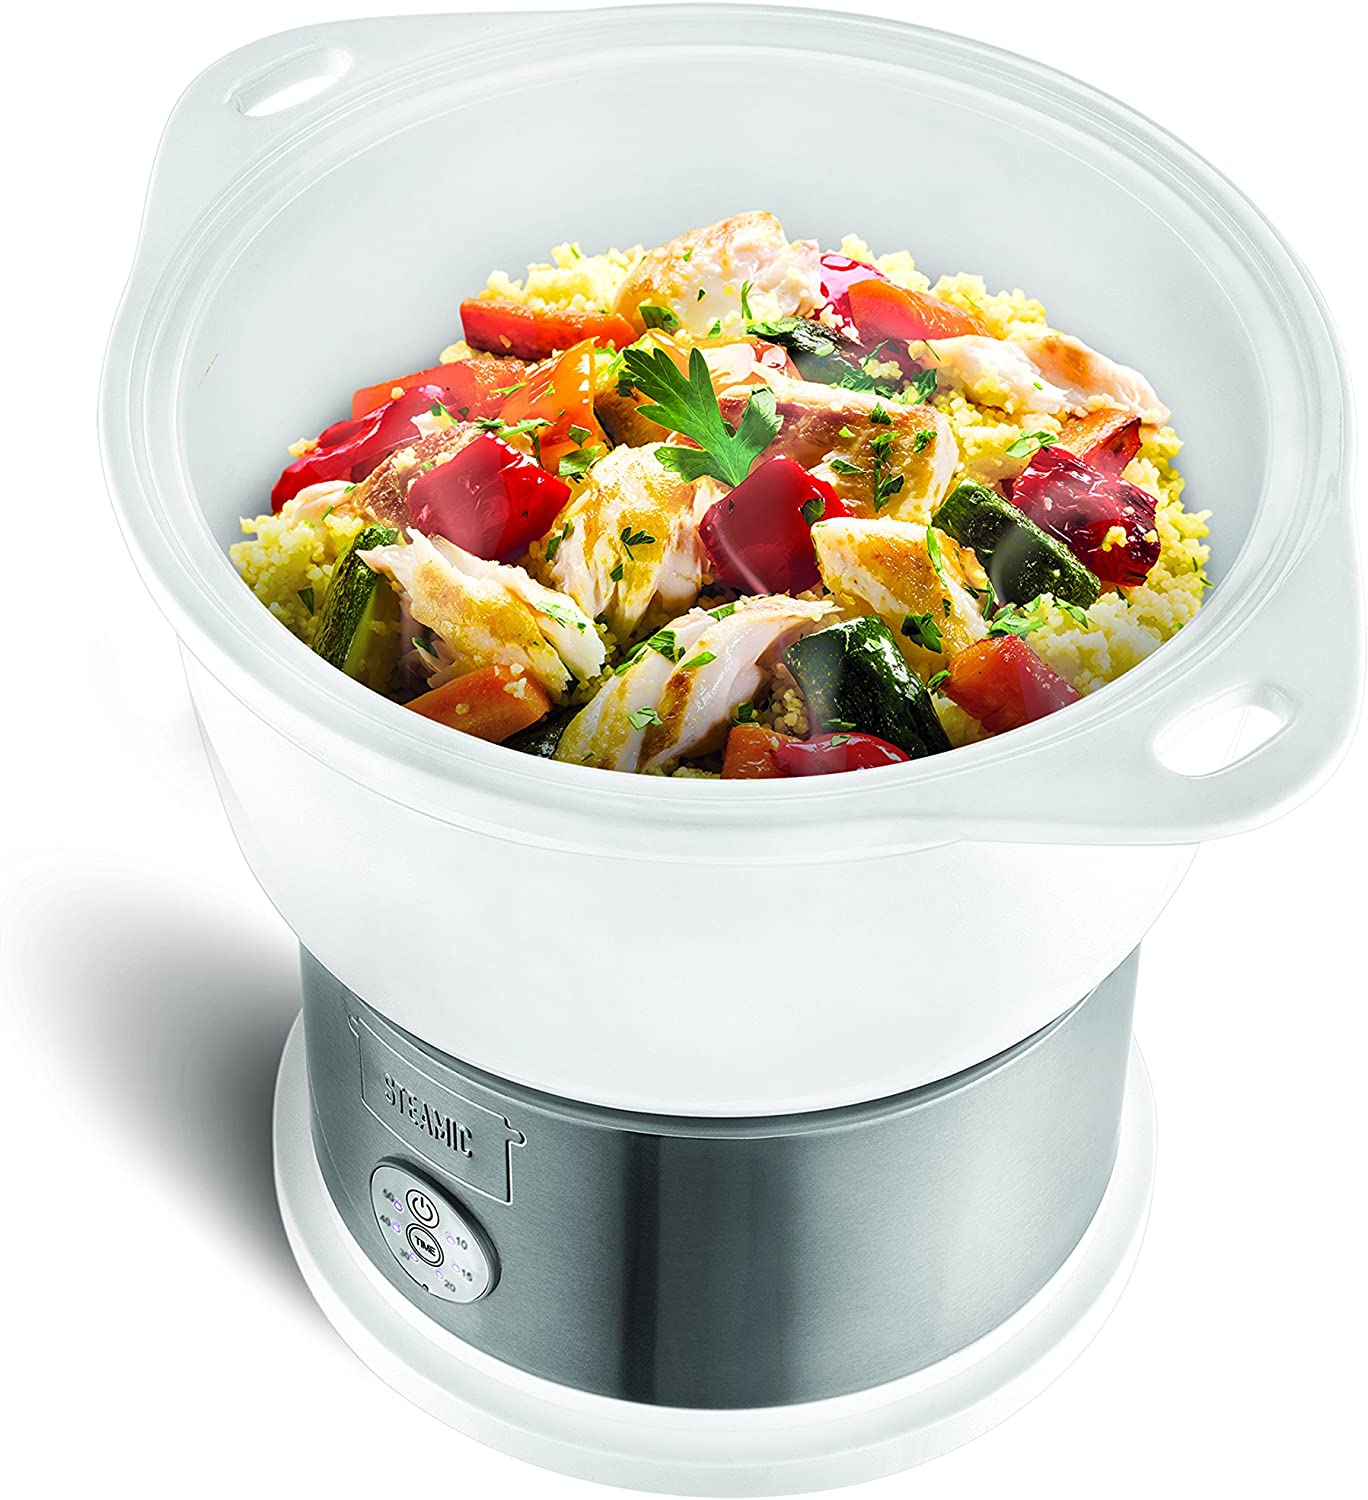 Kalorik Ceramic Steamer with BPA-free Bowl 4.5 Litres | Timer | One Touch Operation